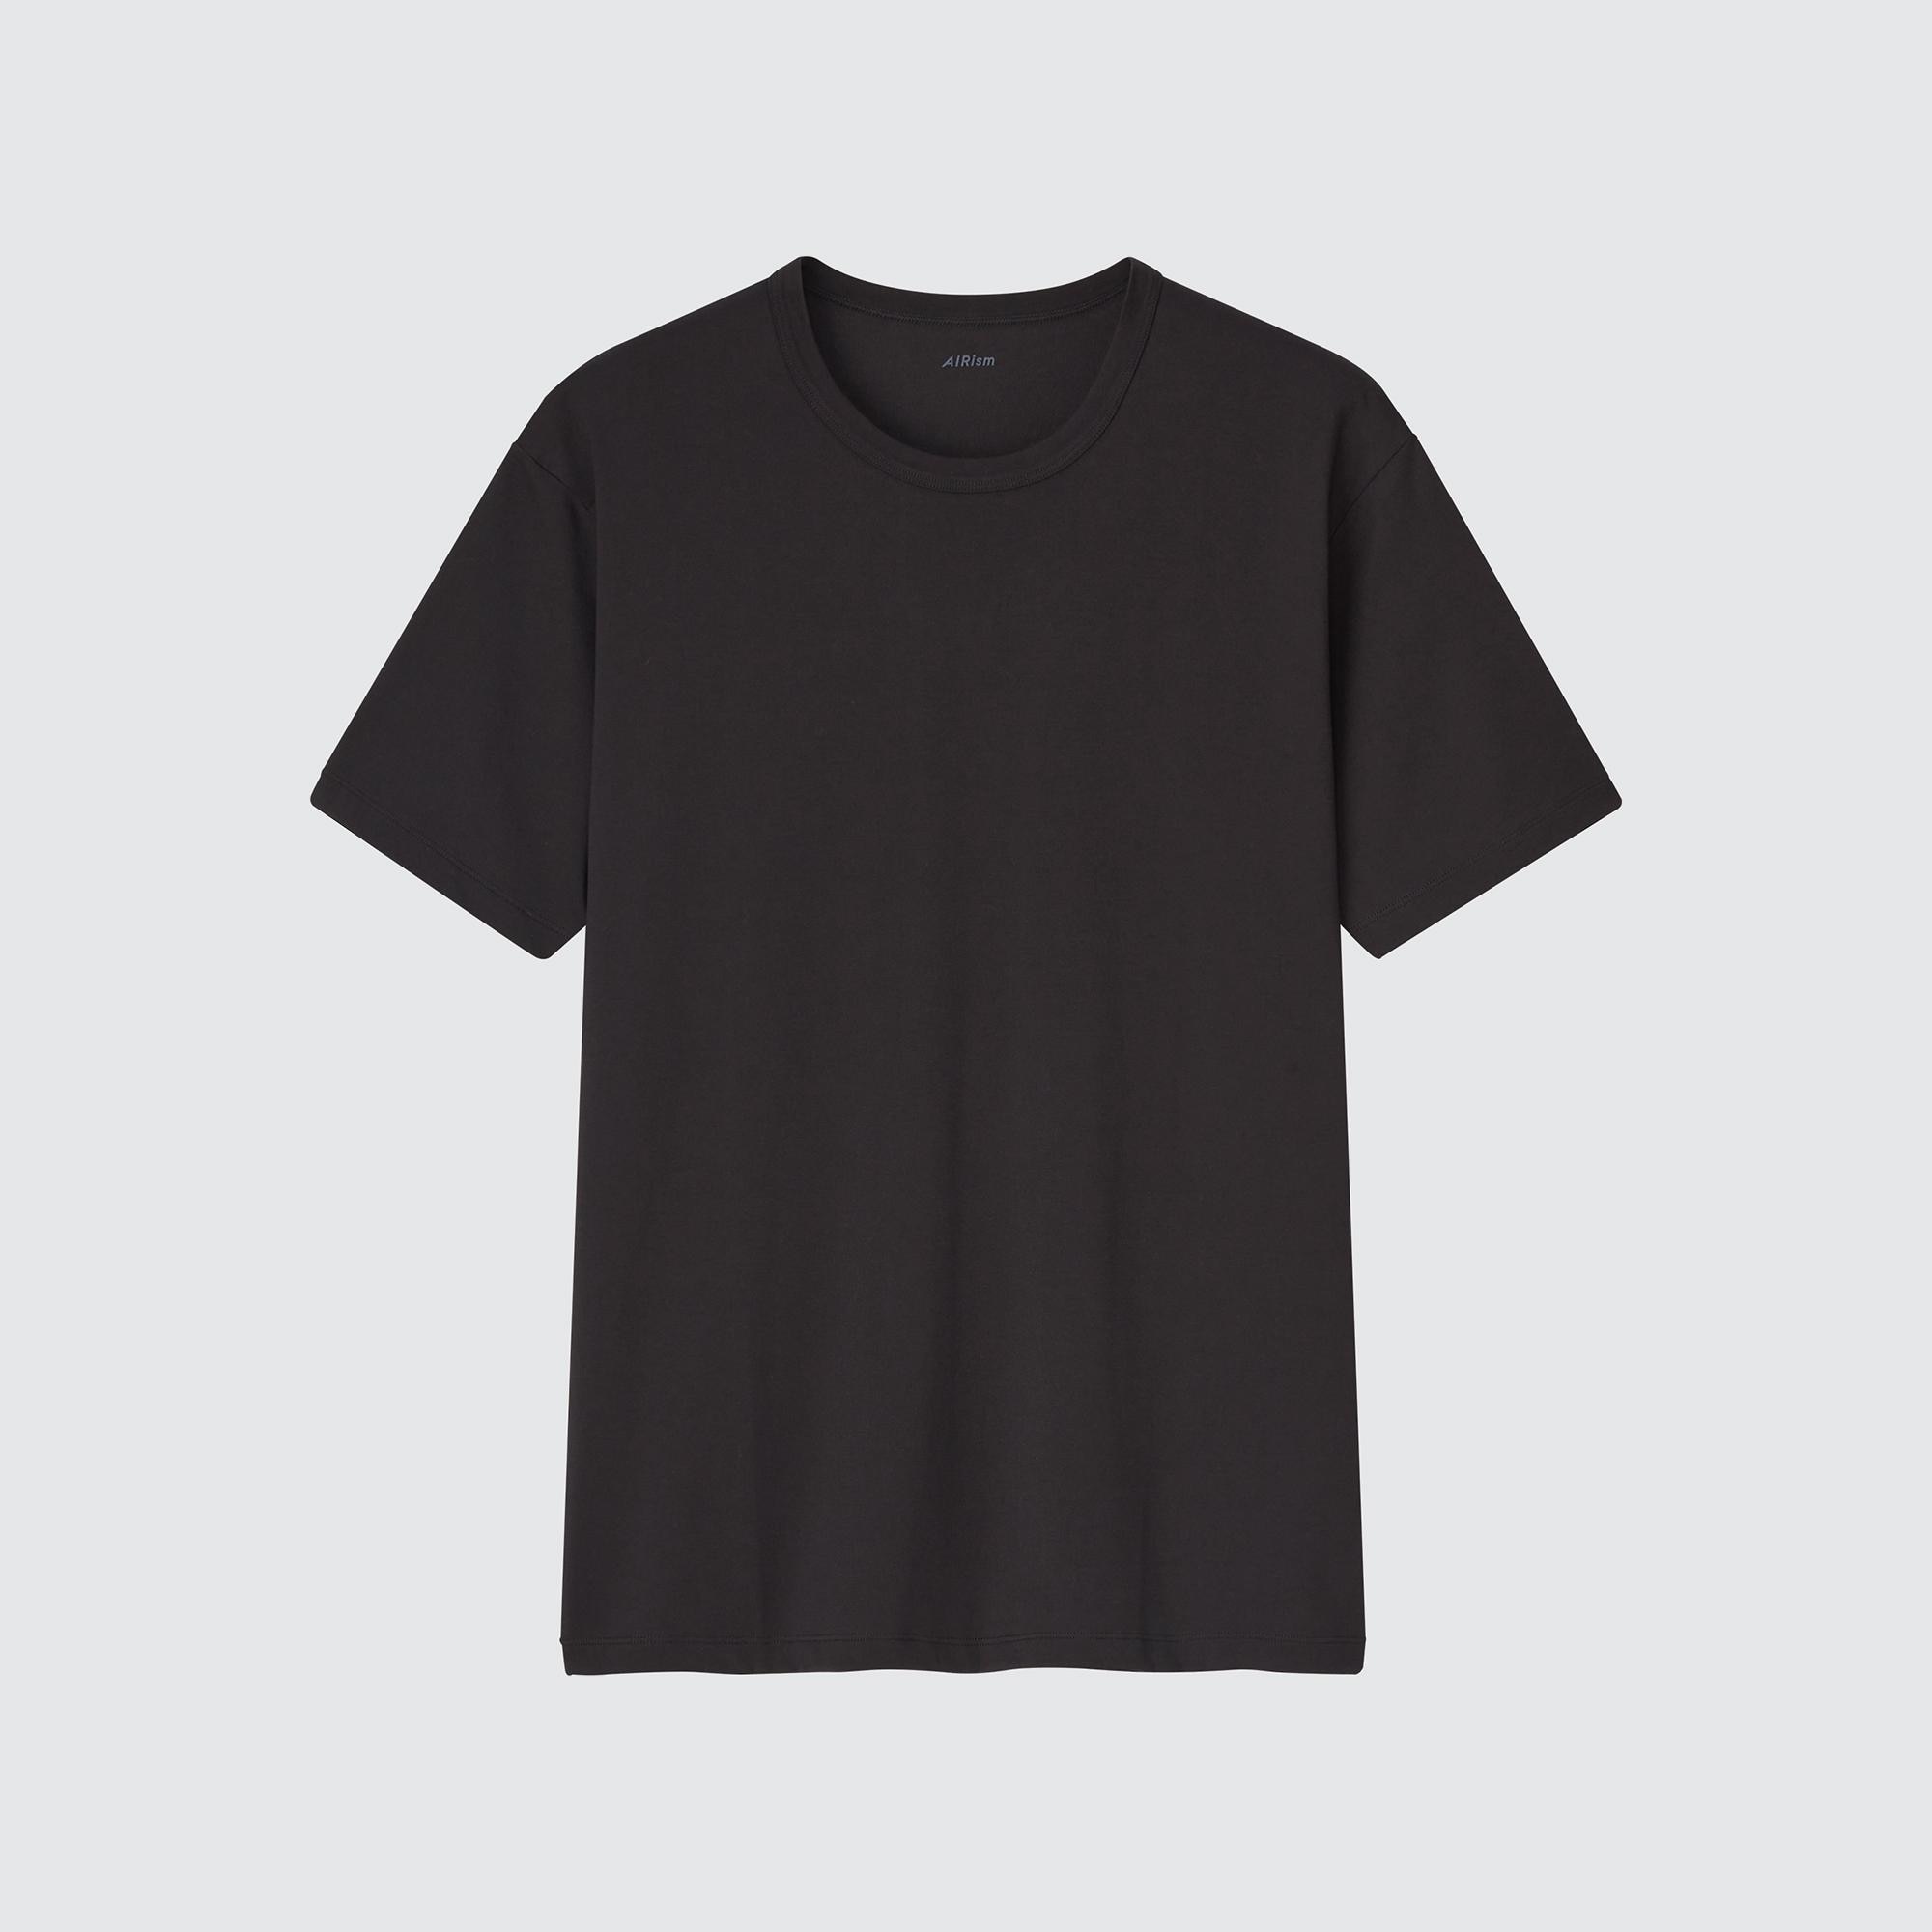 Uniqlo Airism Oversize Tee…Sizing + Fit 